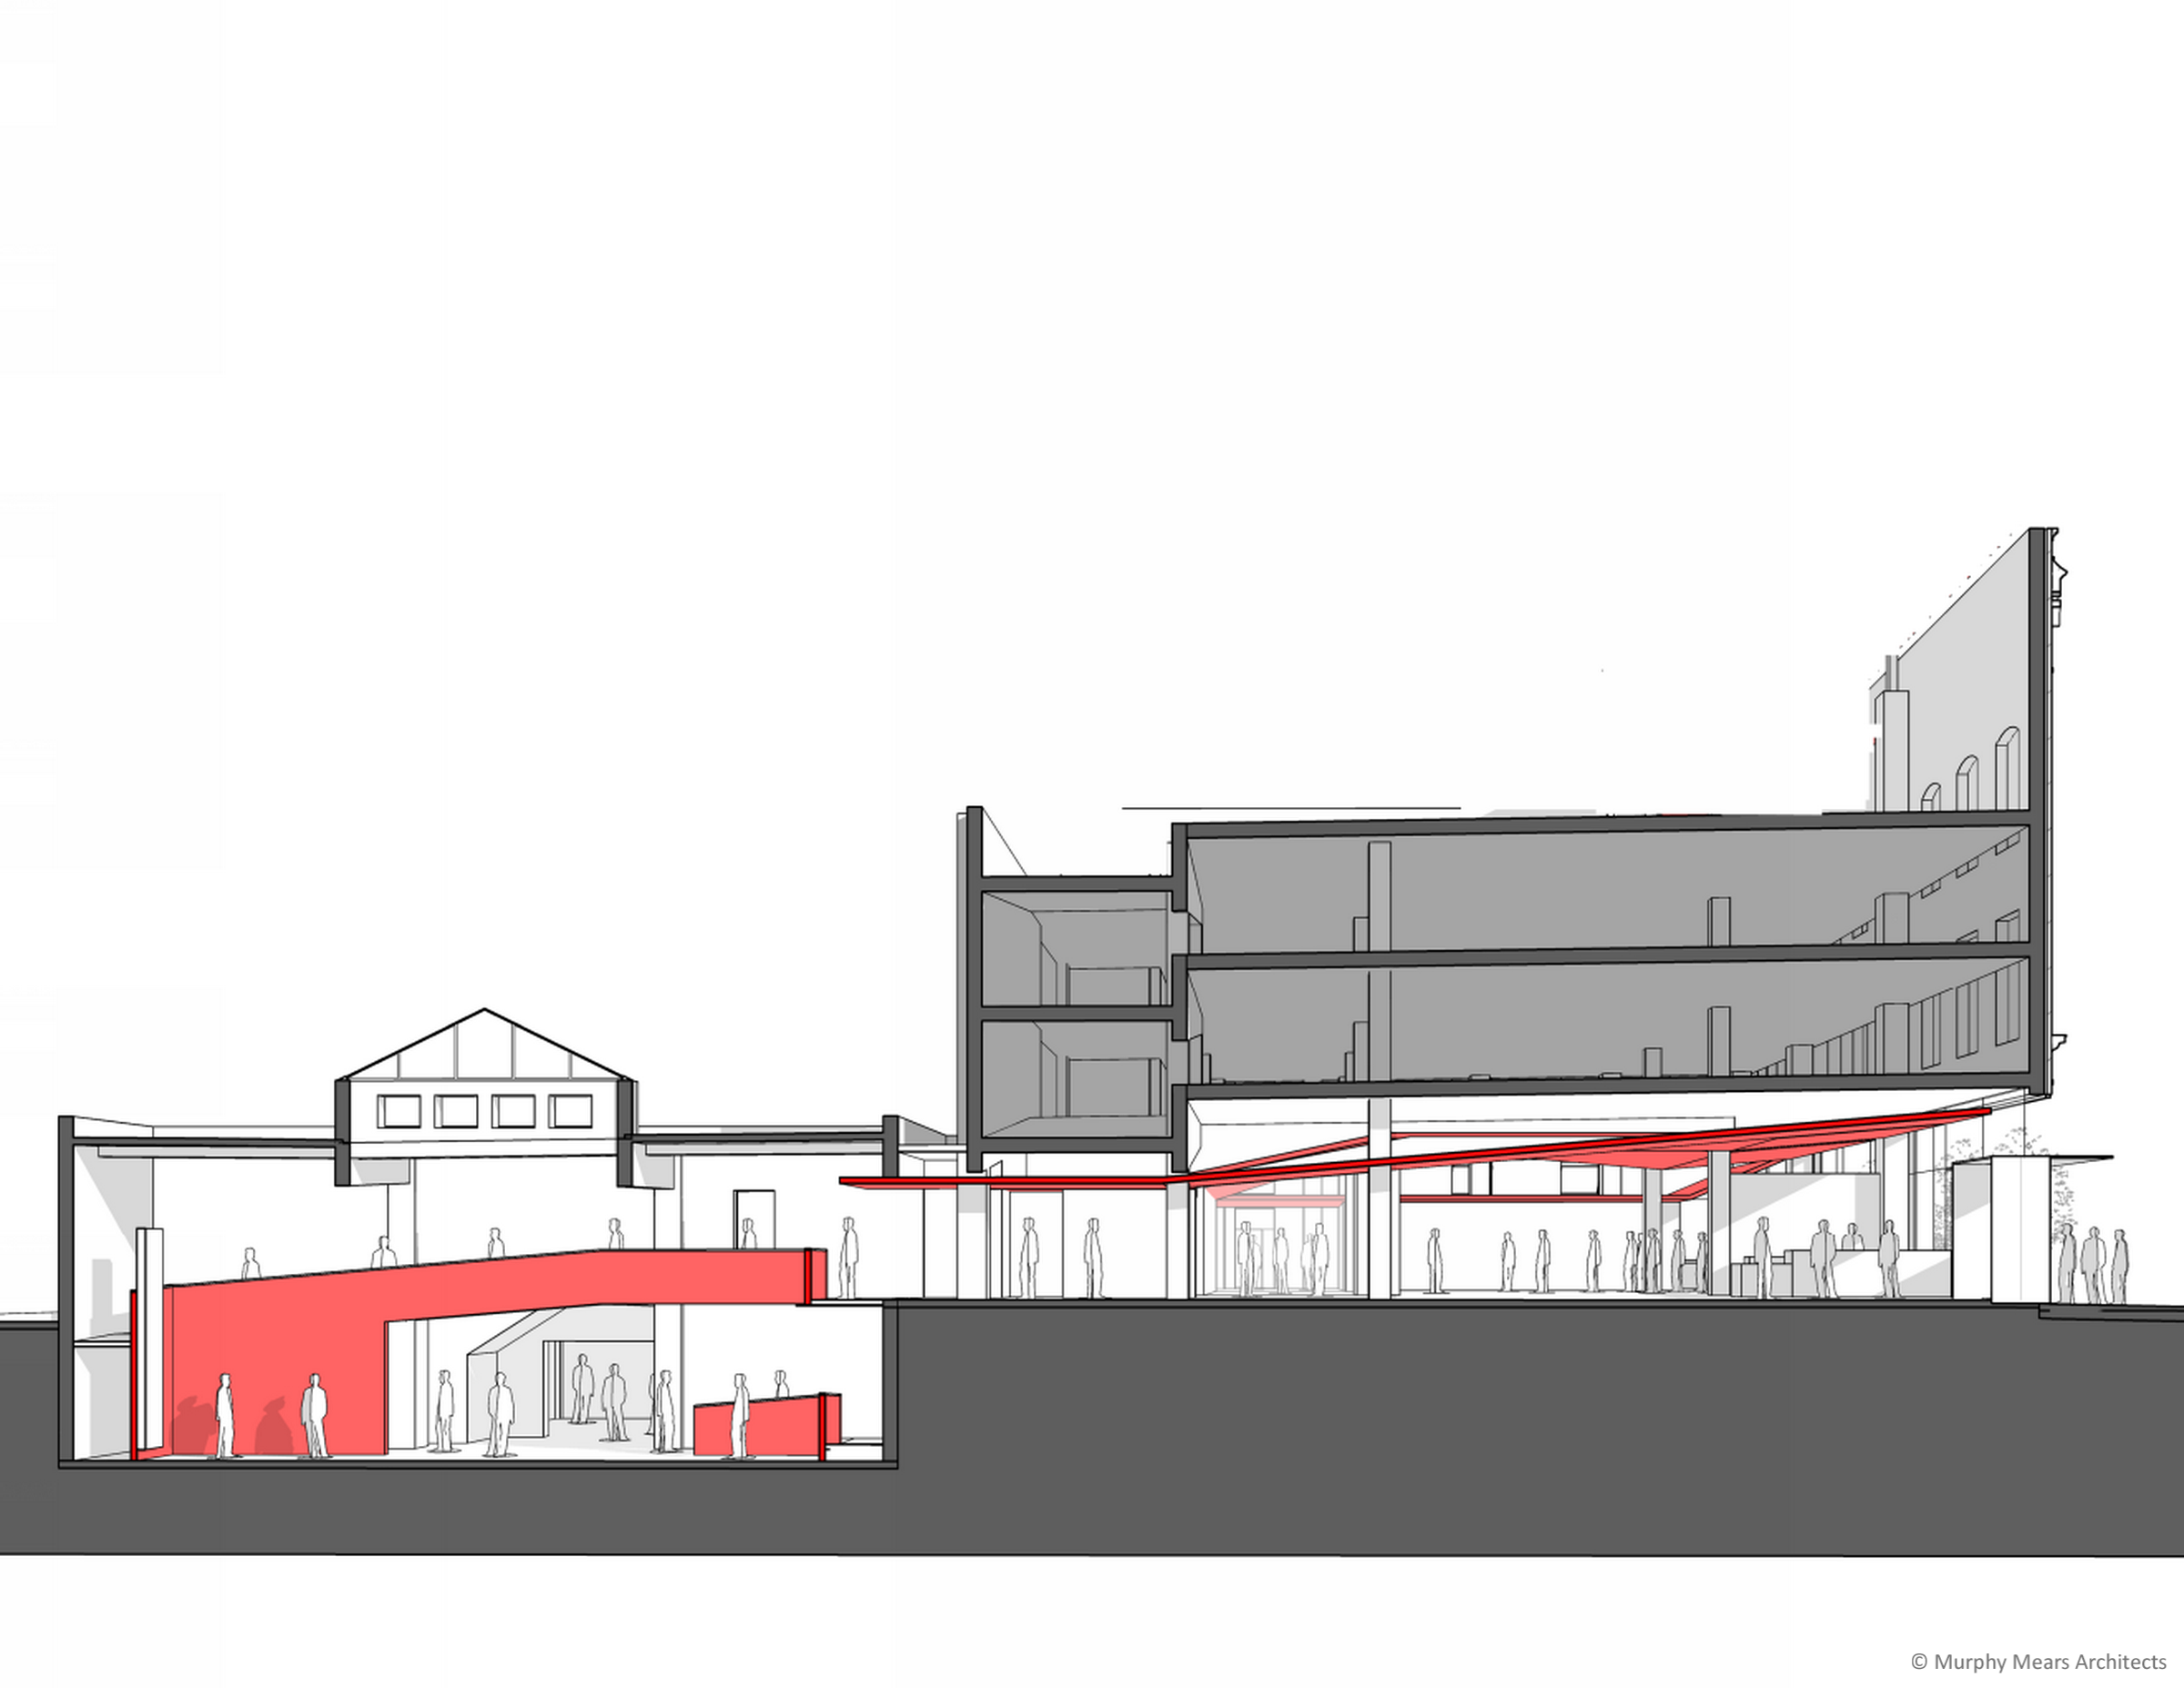 Architecture Center Houston - Competition Drawing - Overall Building Section through street-front Phase I and Boiler Room Phase II.